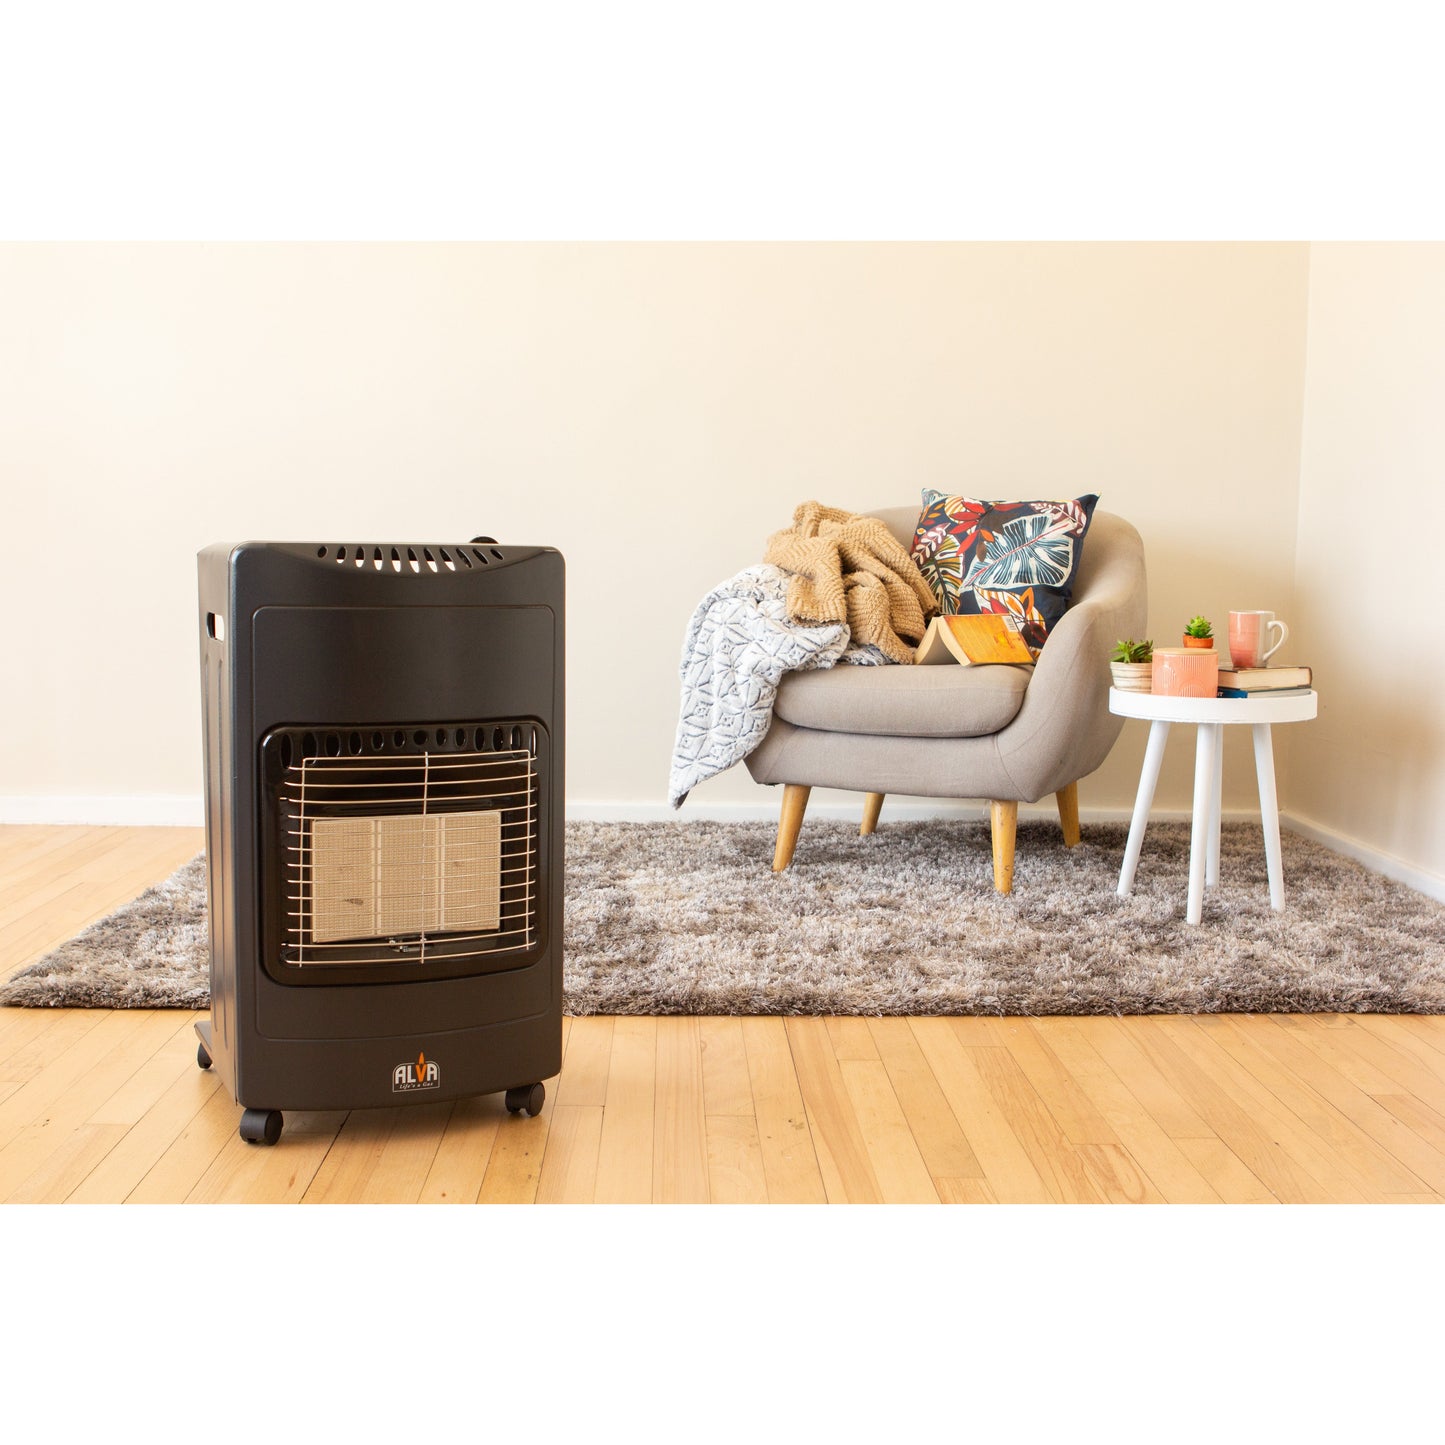 3-PANEL LUXURIOUS INFRARED RADIANT INDOOR GAS HEATER